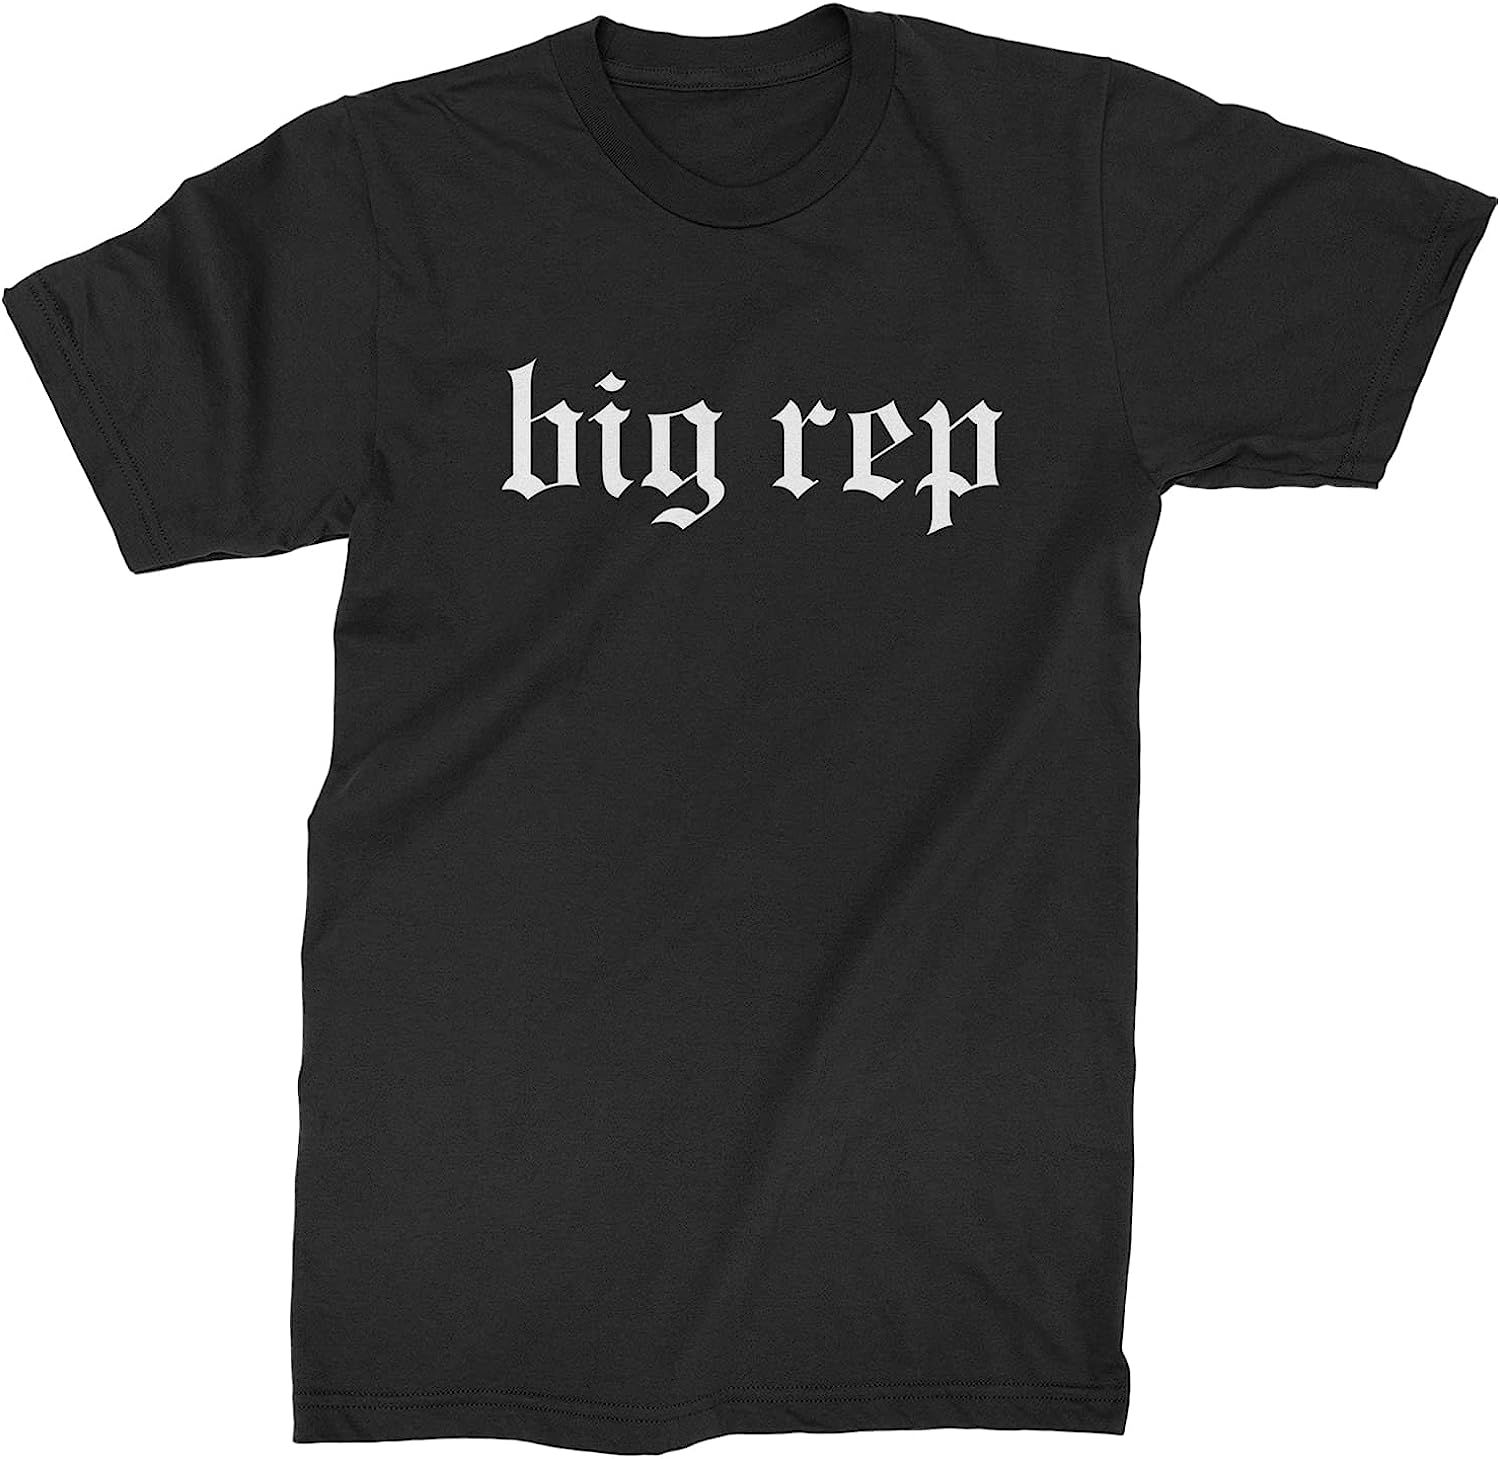 Expression Tees Big Rep Reputation Music Lover Gift Fan Favorite Mens T-Shirt | Amazon (US)